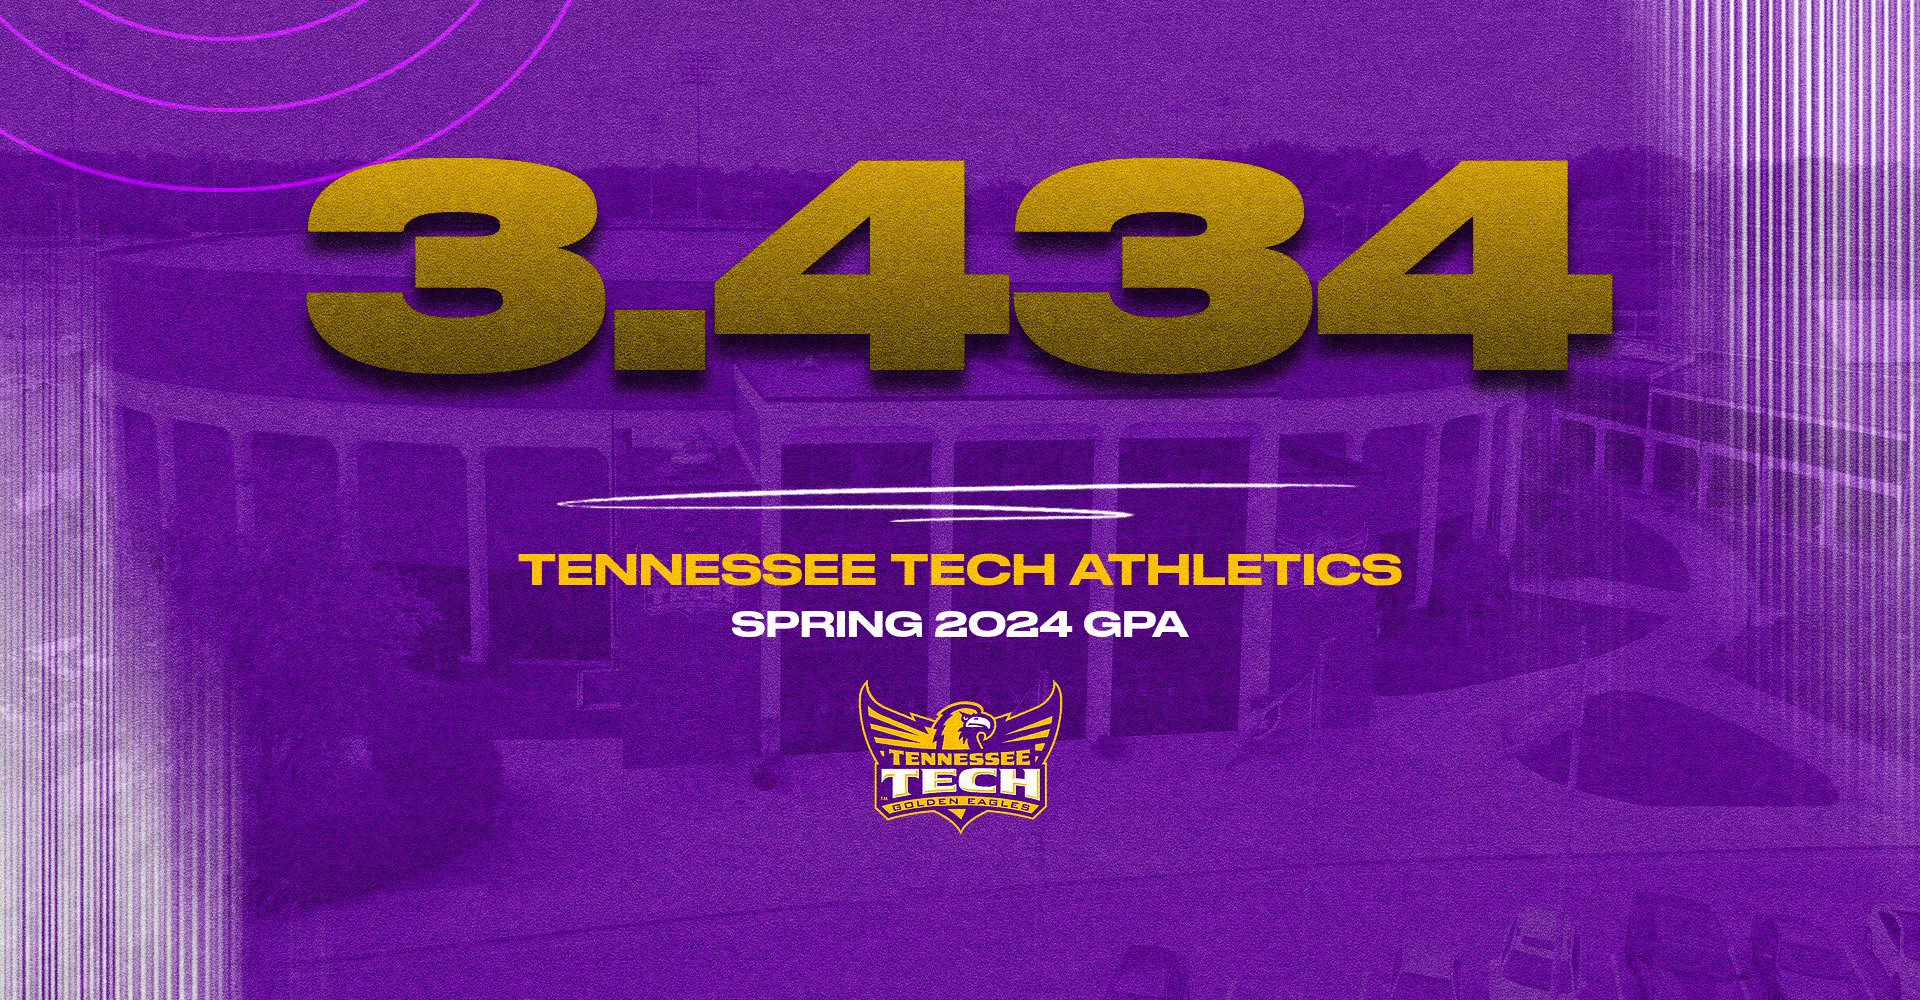 Golden Eagle student-athletes record 31st straight semester with a 3.0 or better GPA